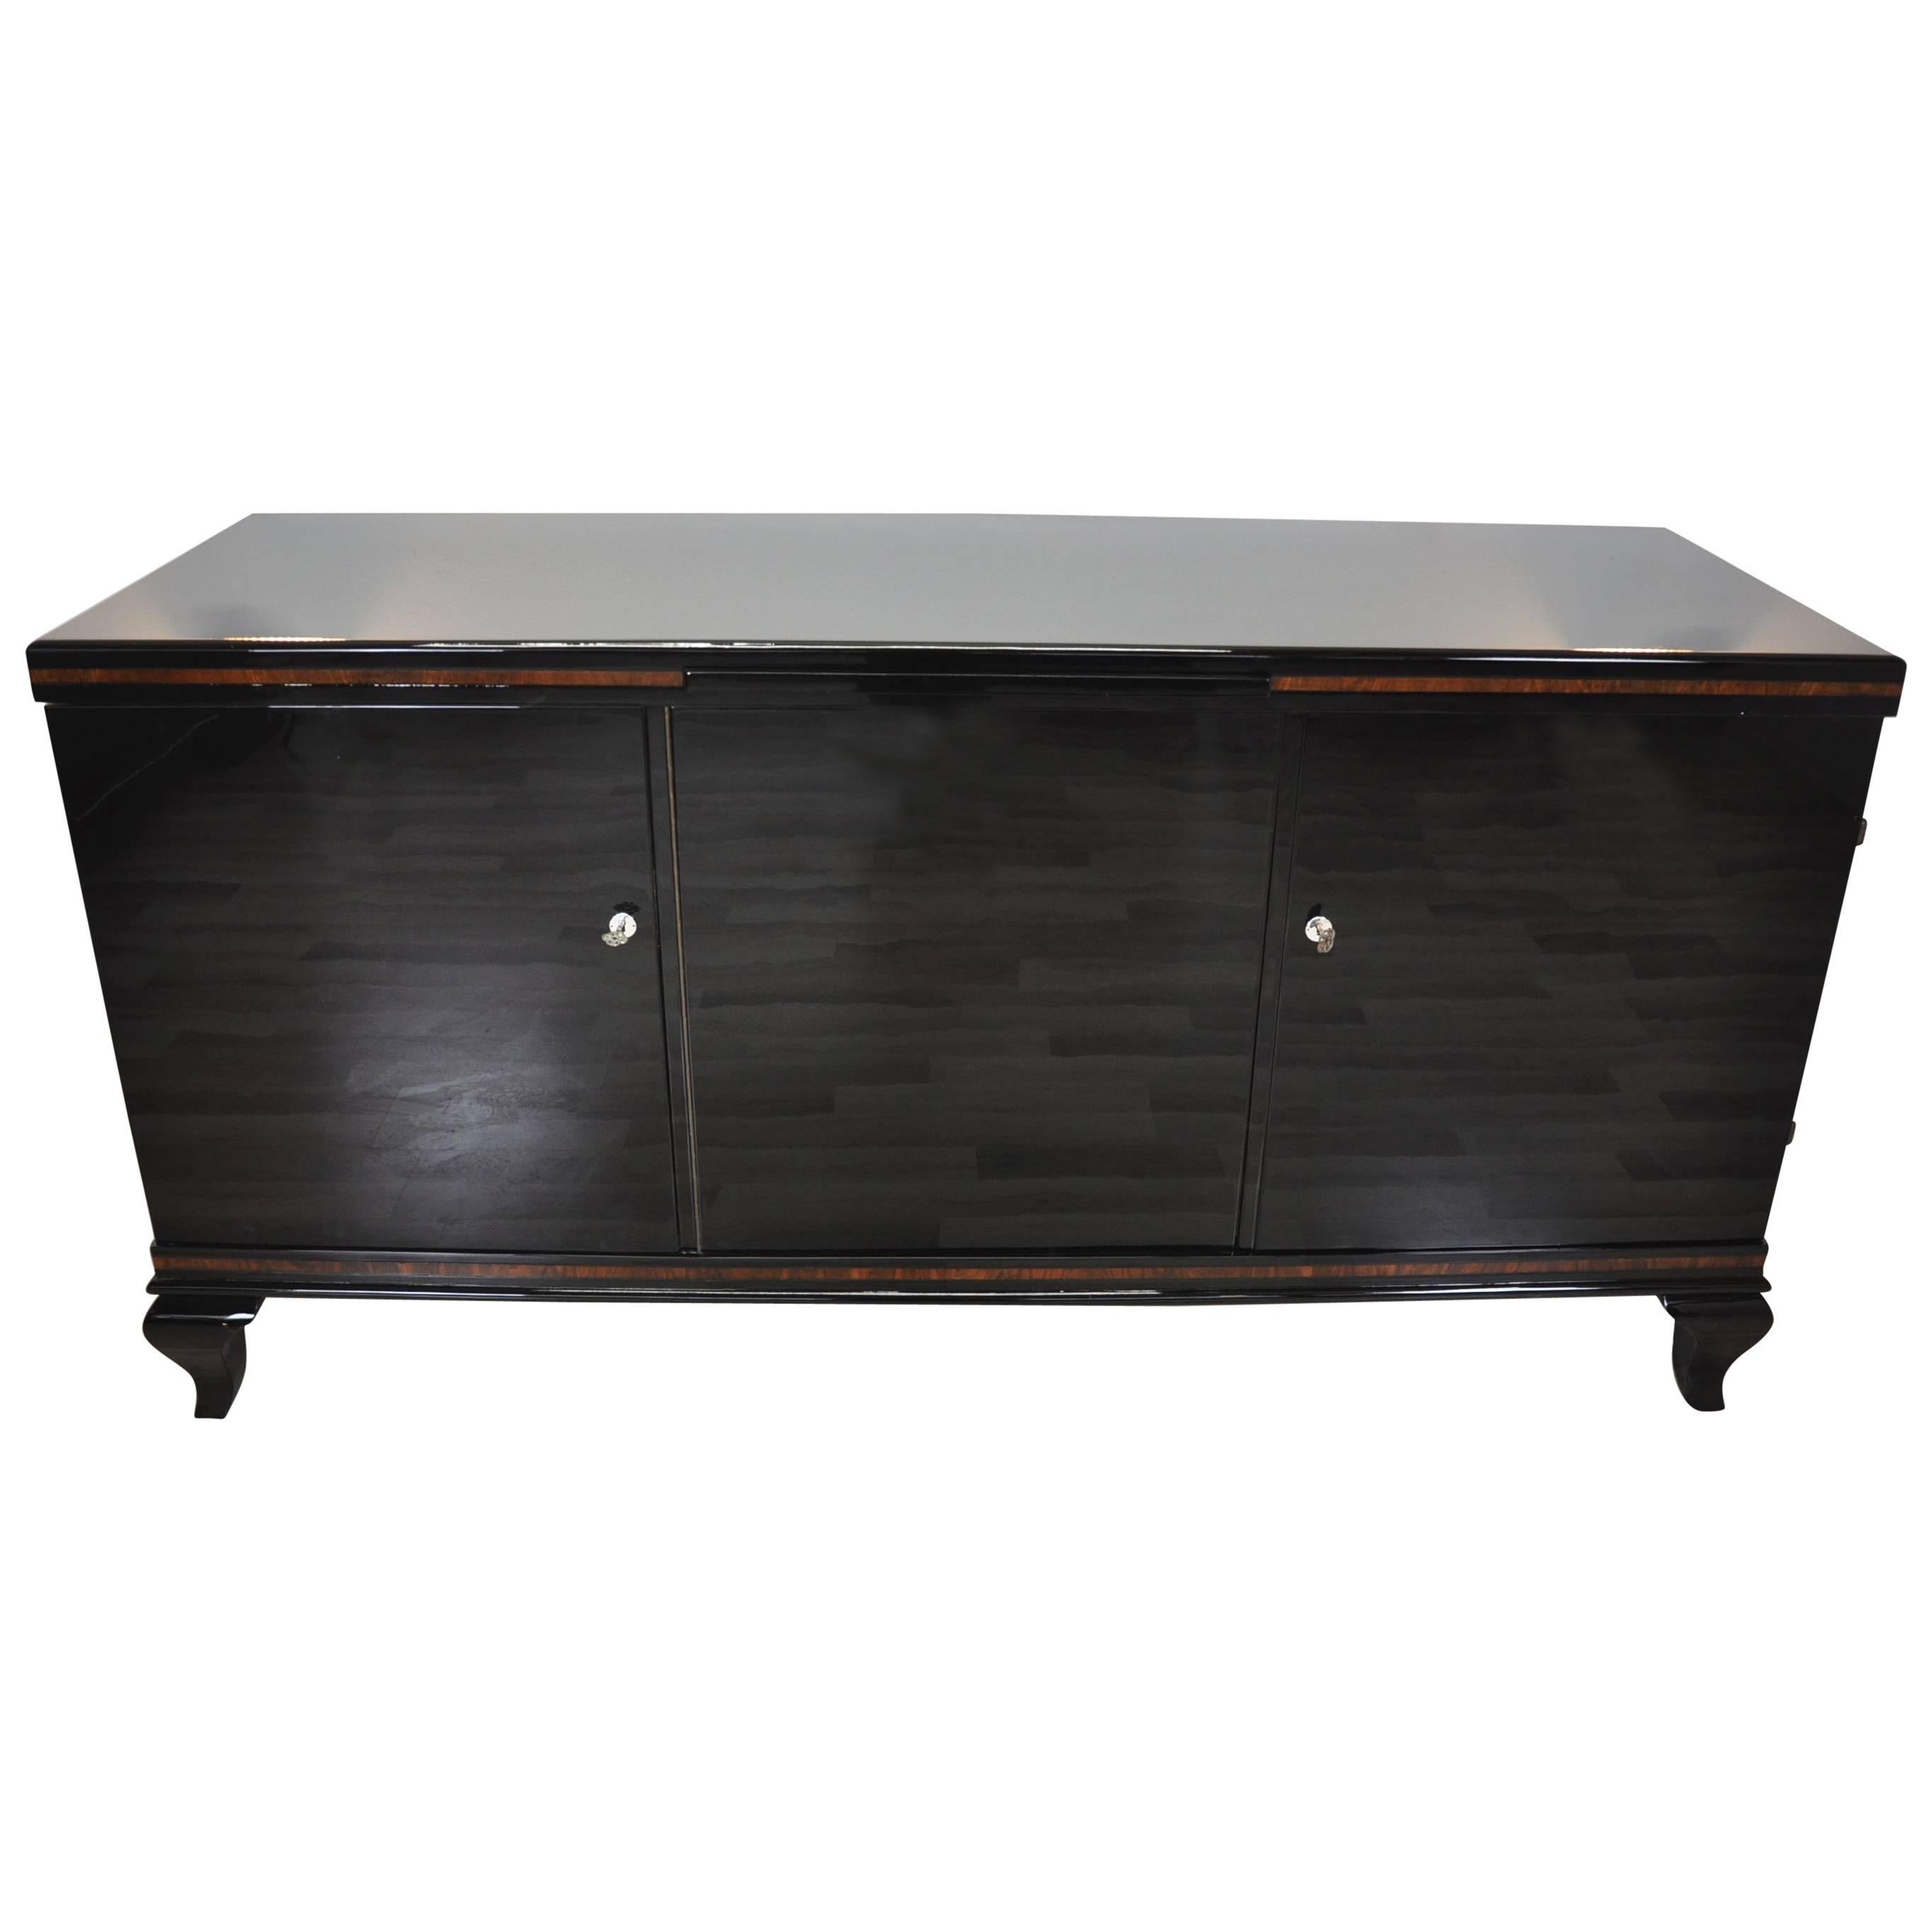 French Art Deco Sideboard with Walnut Details